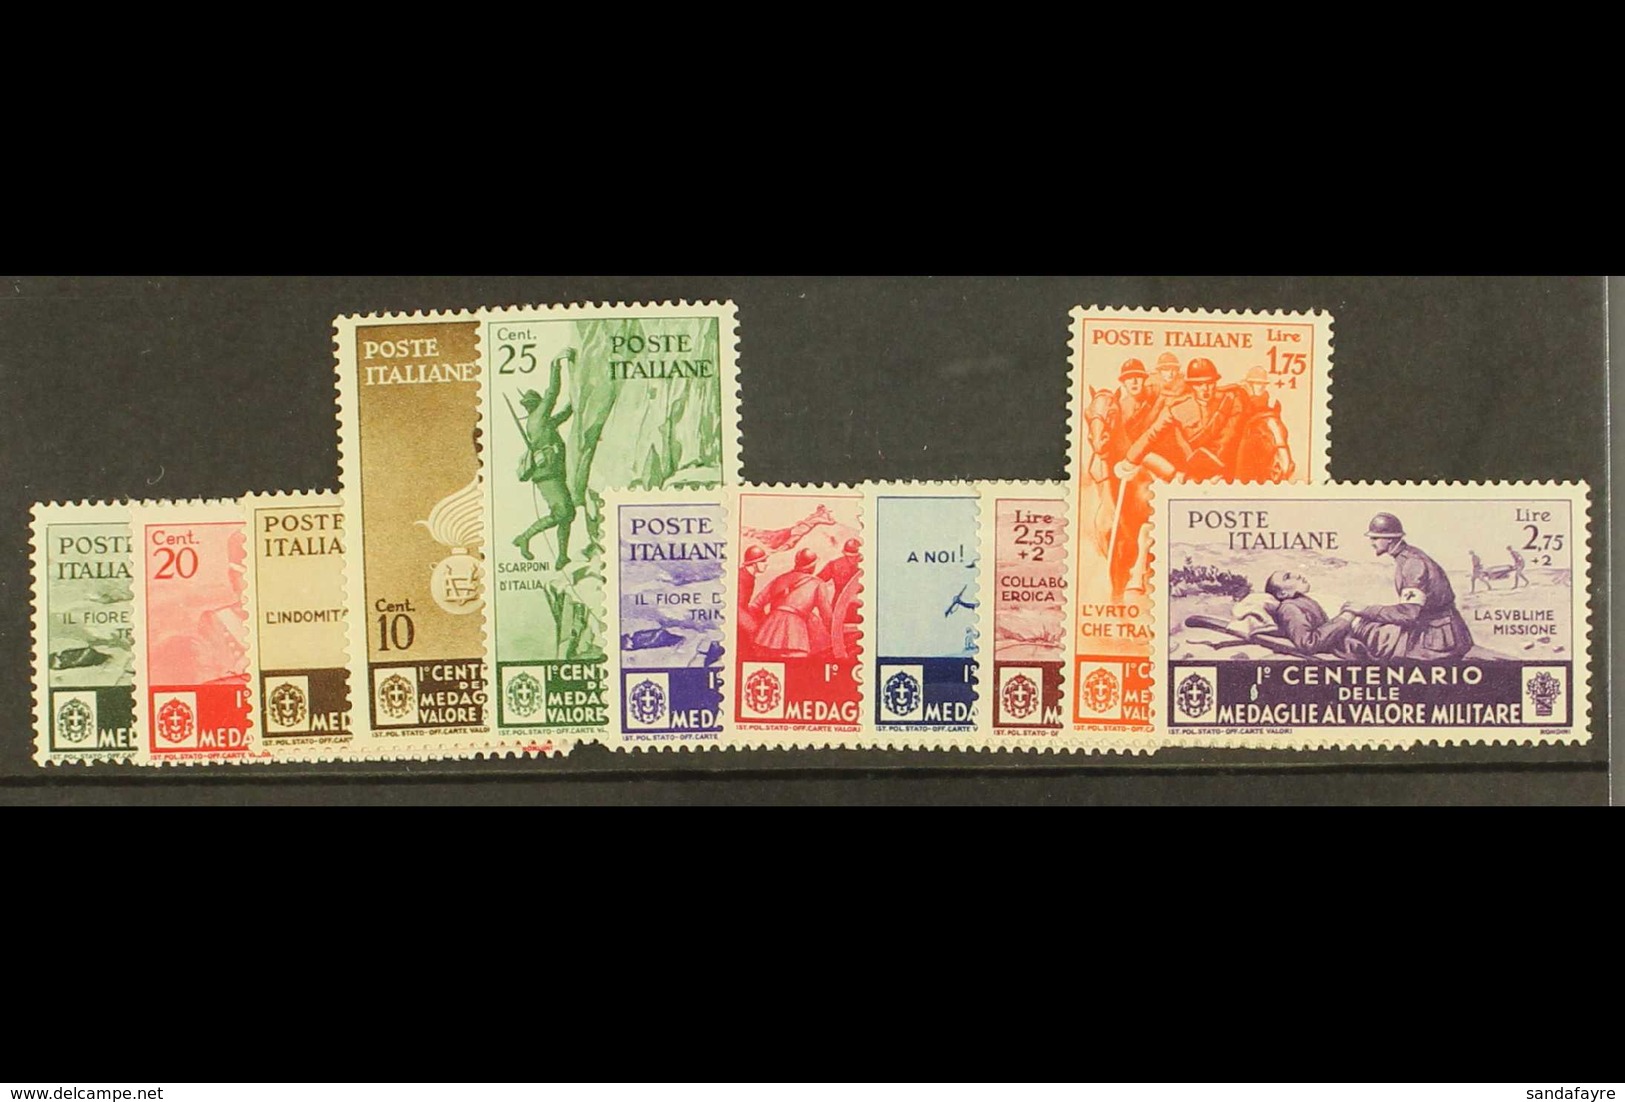 1934 Medal Of Valour Postage Set, Sass S76, Superb Never Hinged Mint. Cat €450 (£380) (11 Stamps) For More Images, Pleas - Unclassified